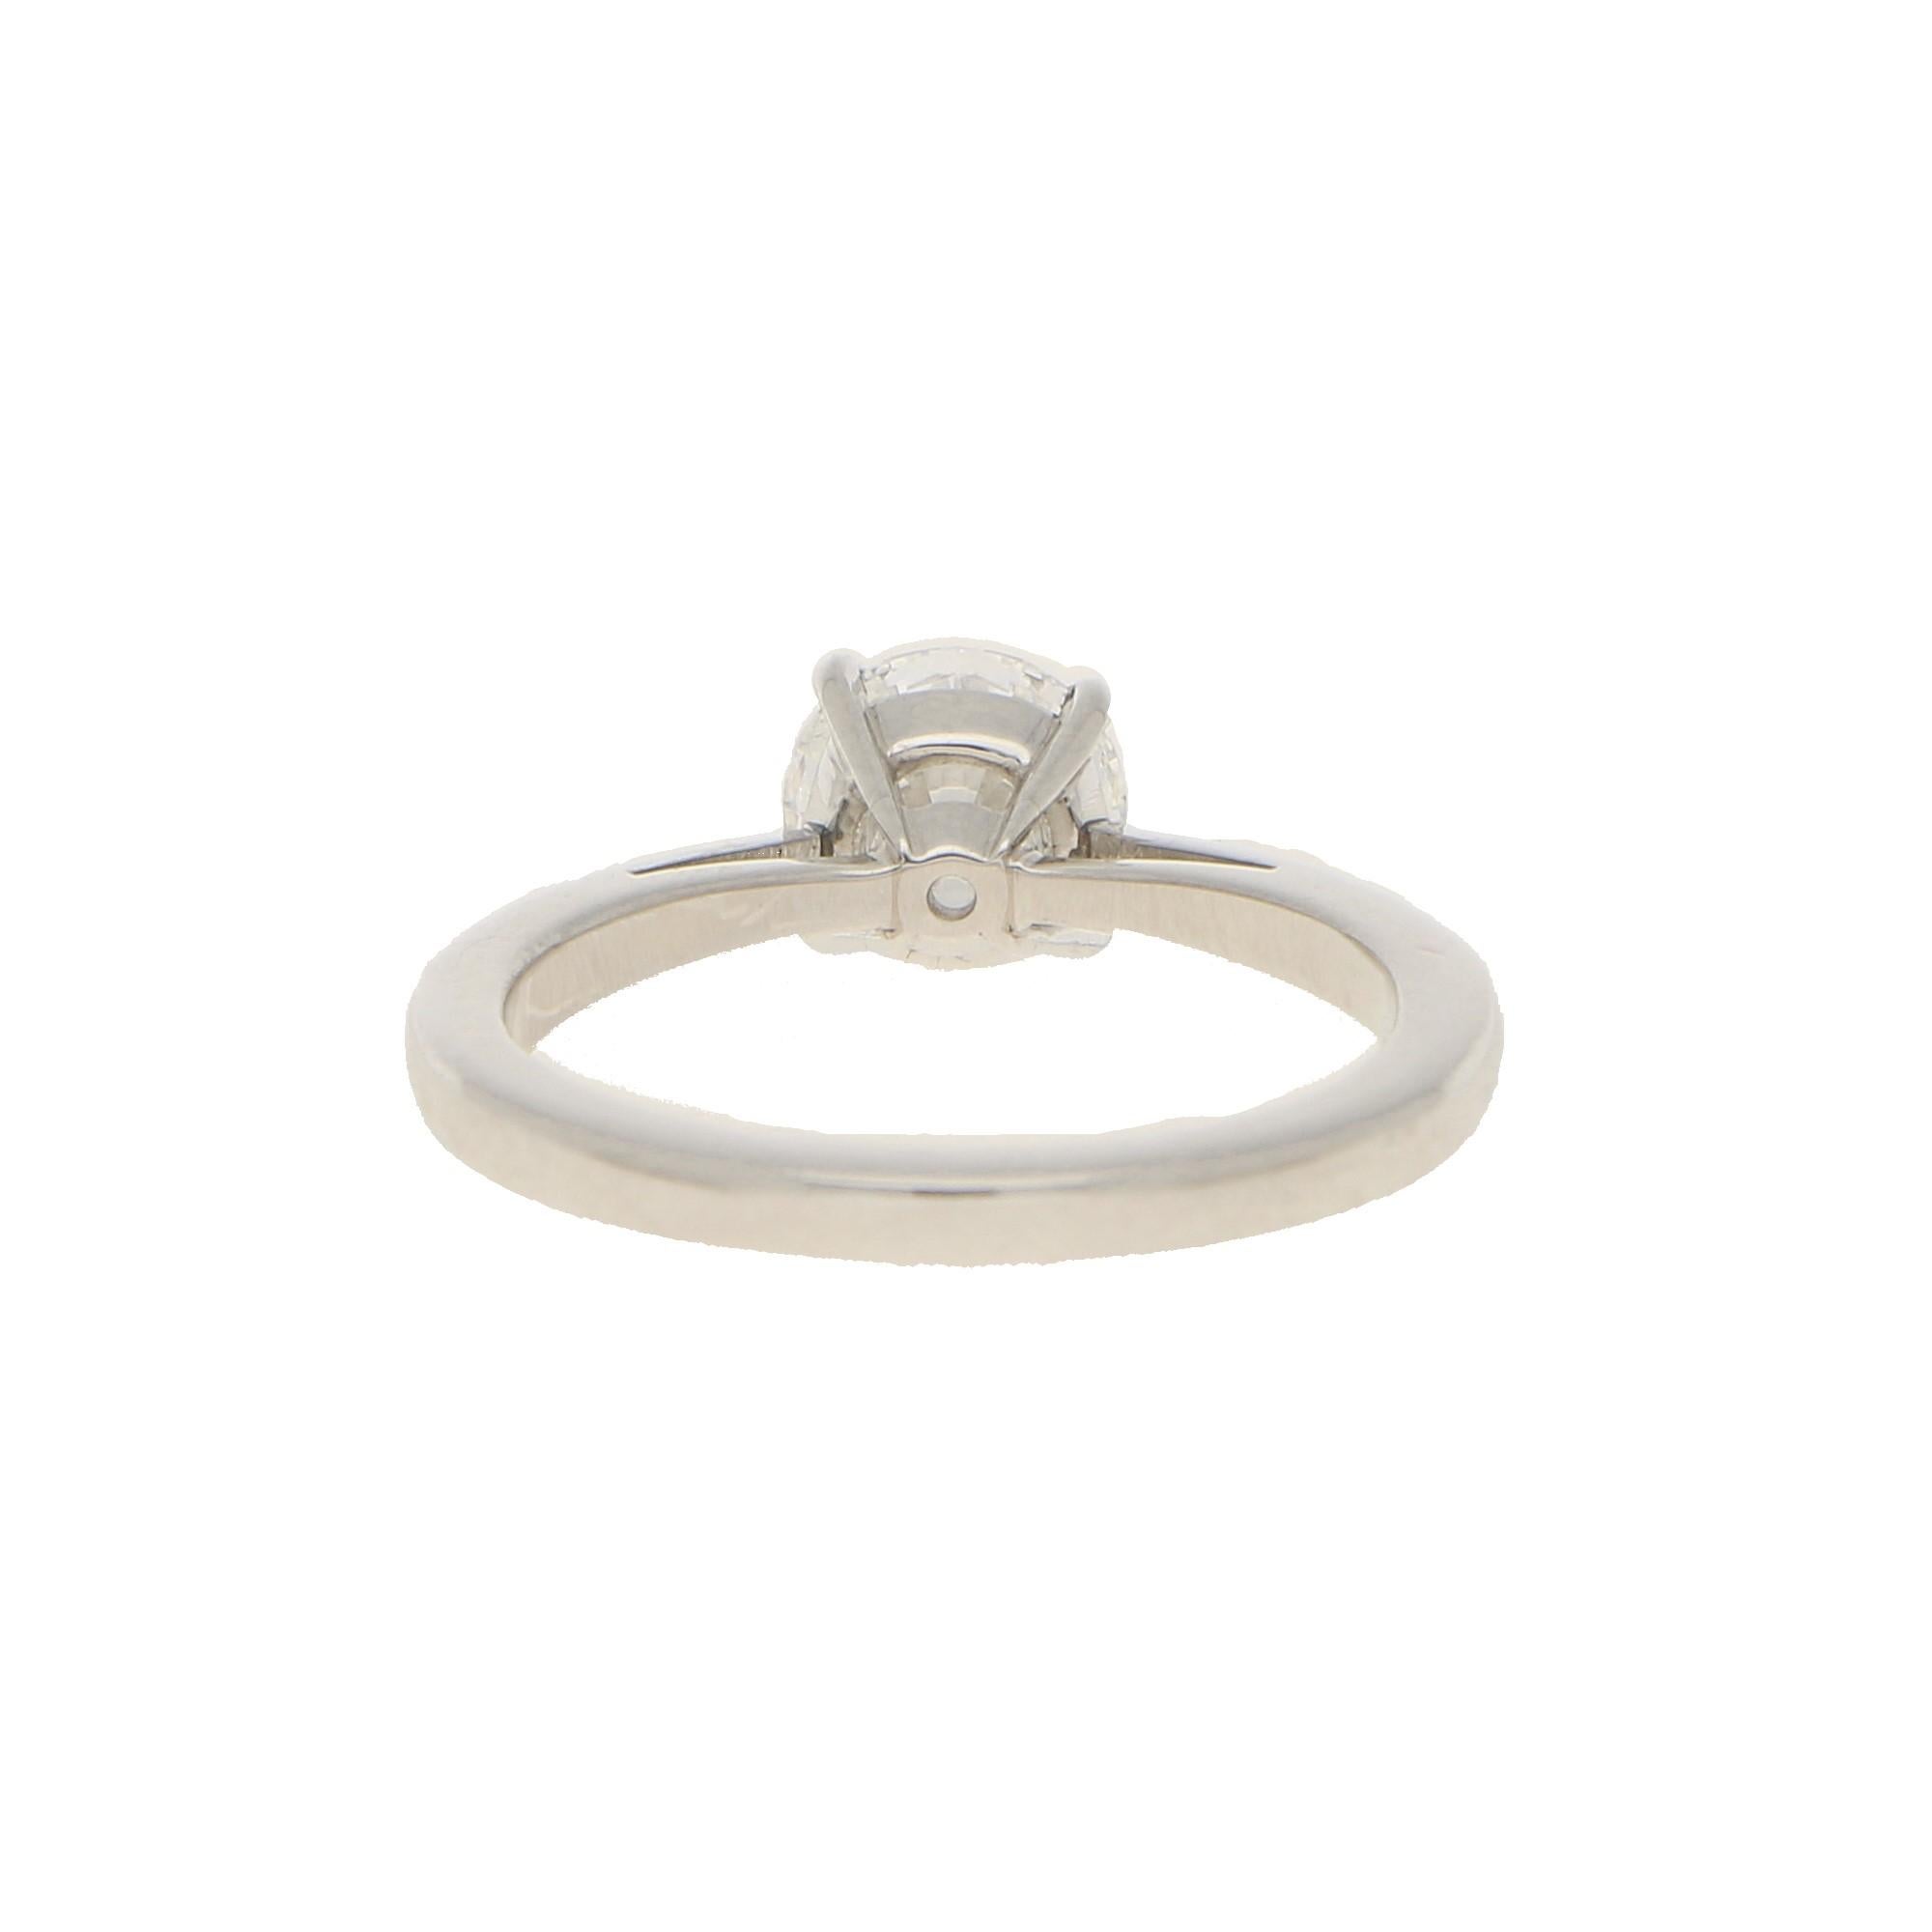 Contemporary Certified Diamond Solitaire Engagement Ring Set in Platinum 